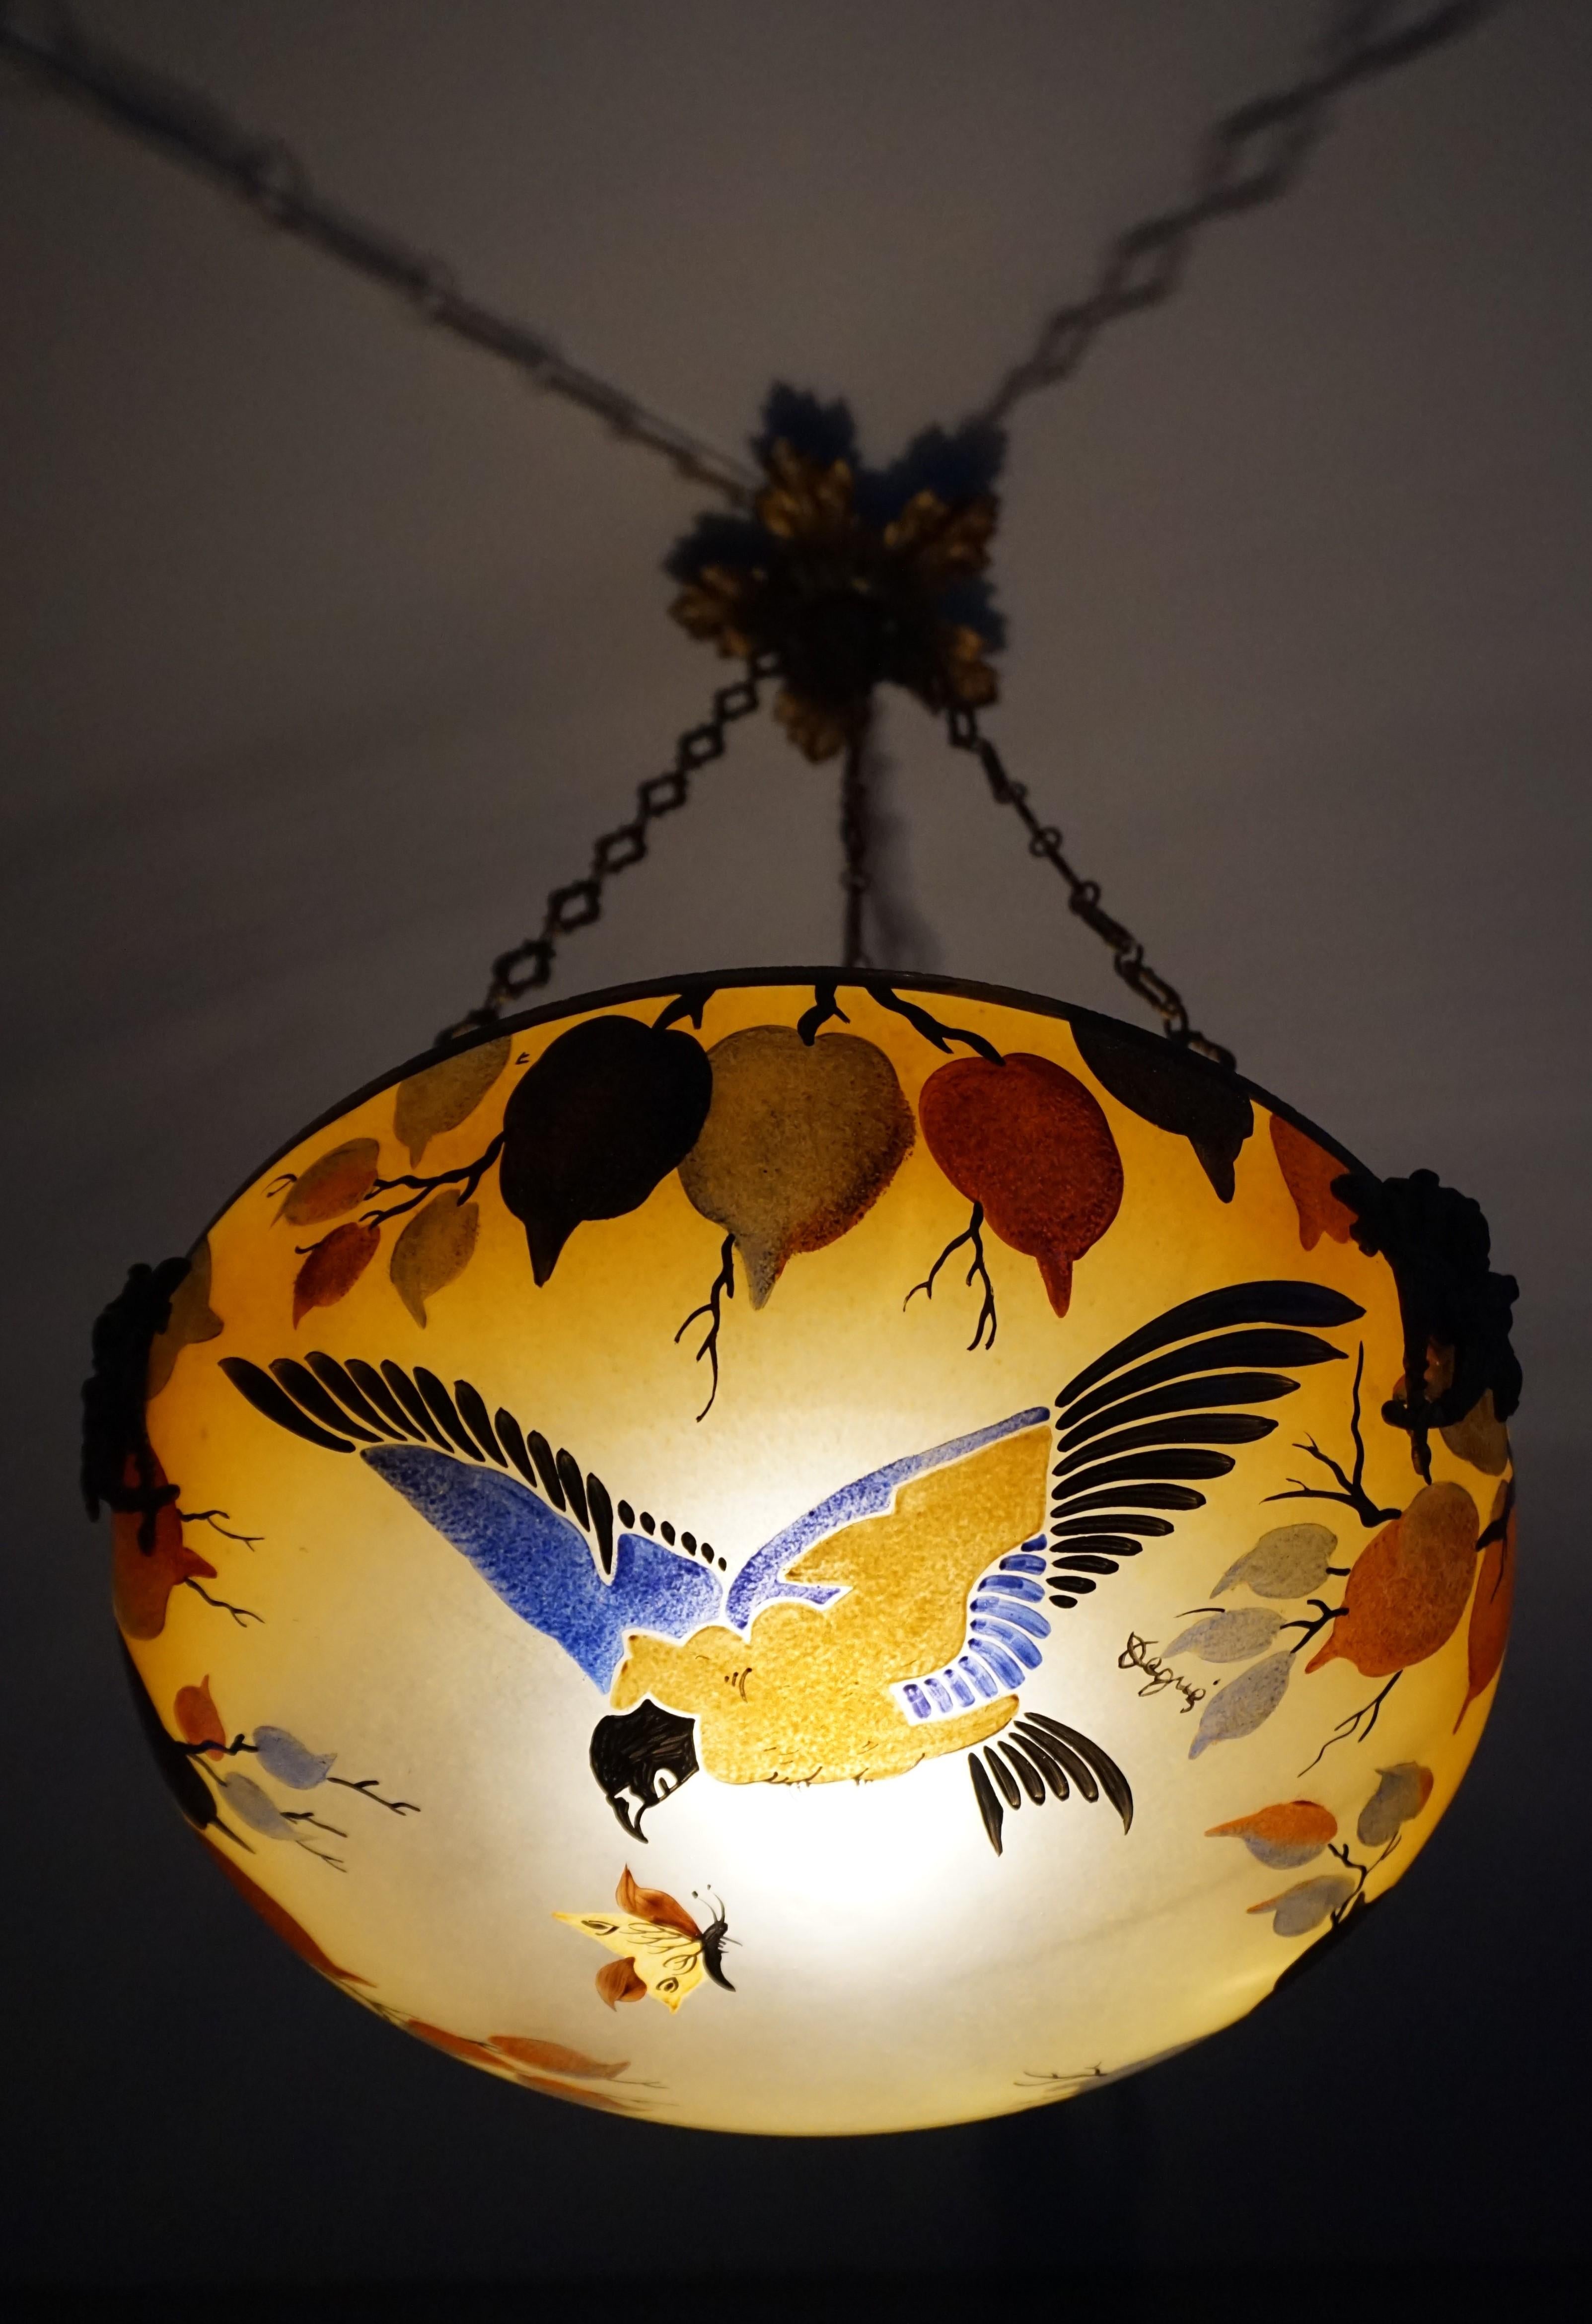 Rare and stunning work of lighting art by David Gueron a.k.a. Degué.

If you are passionate about early 20th century decorative art then you will love this striking pendant. What you are seeing here is a one of a kind, hand painted and enamelled